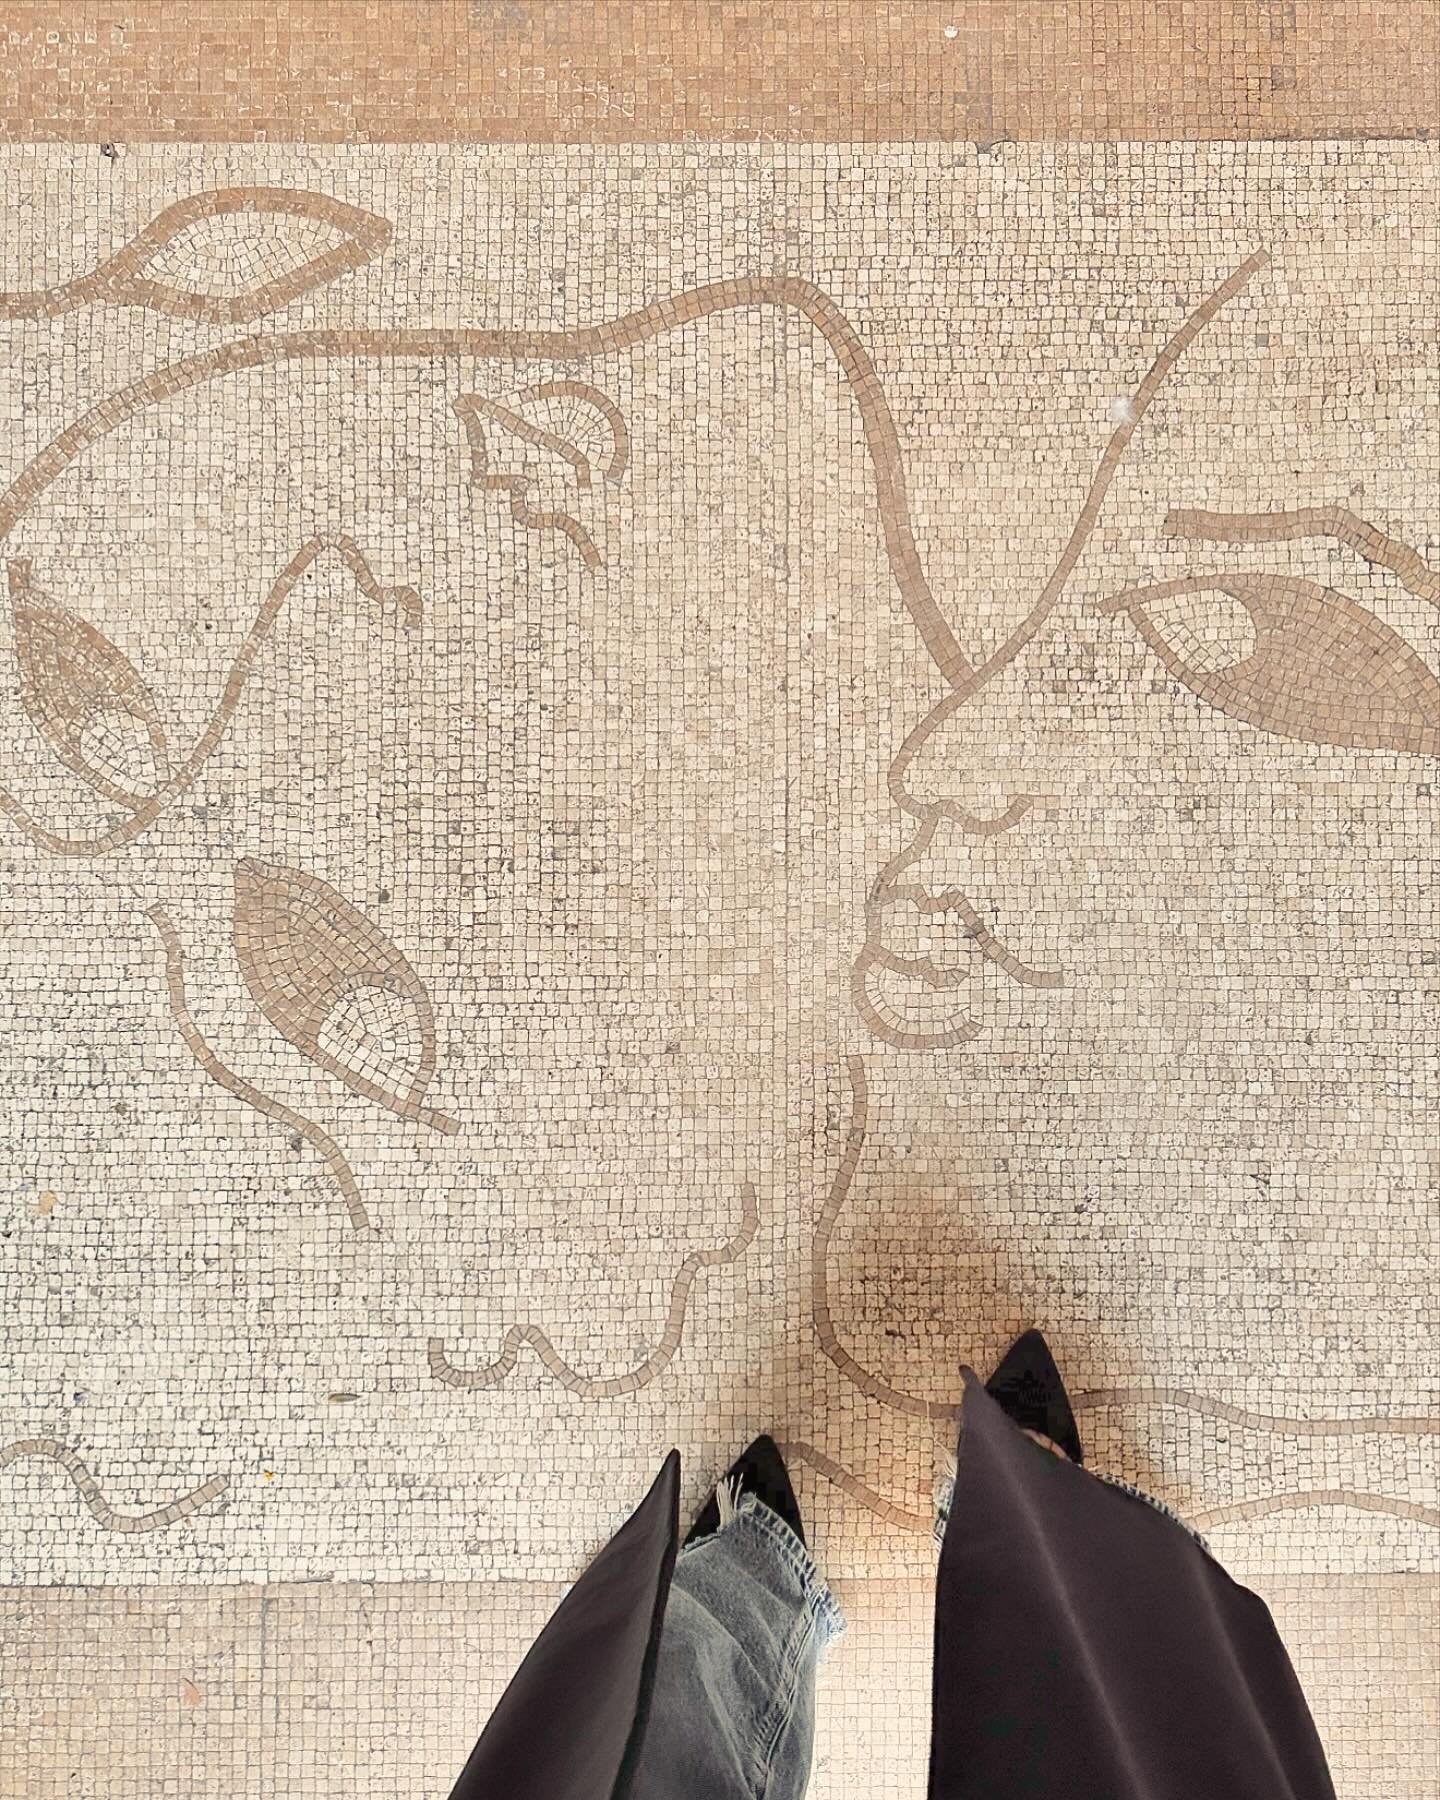 A Parisian style welcome. #iykyk #paris #viewfromthetop #ihavethisthingwithfloors #ihavethisthingwithtiles #mosaic #ootd @ysl